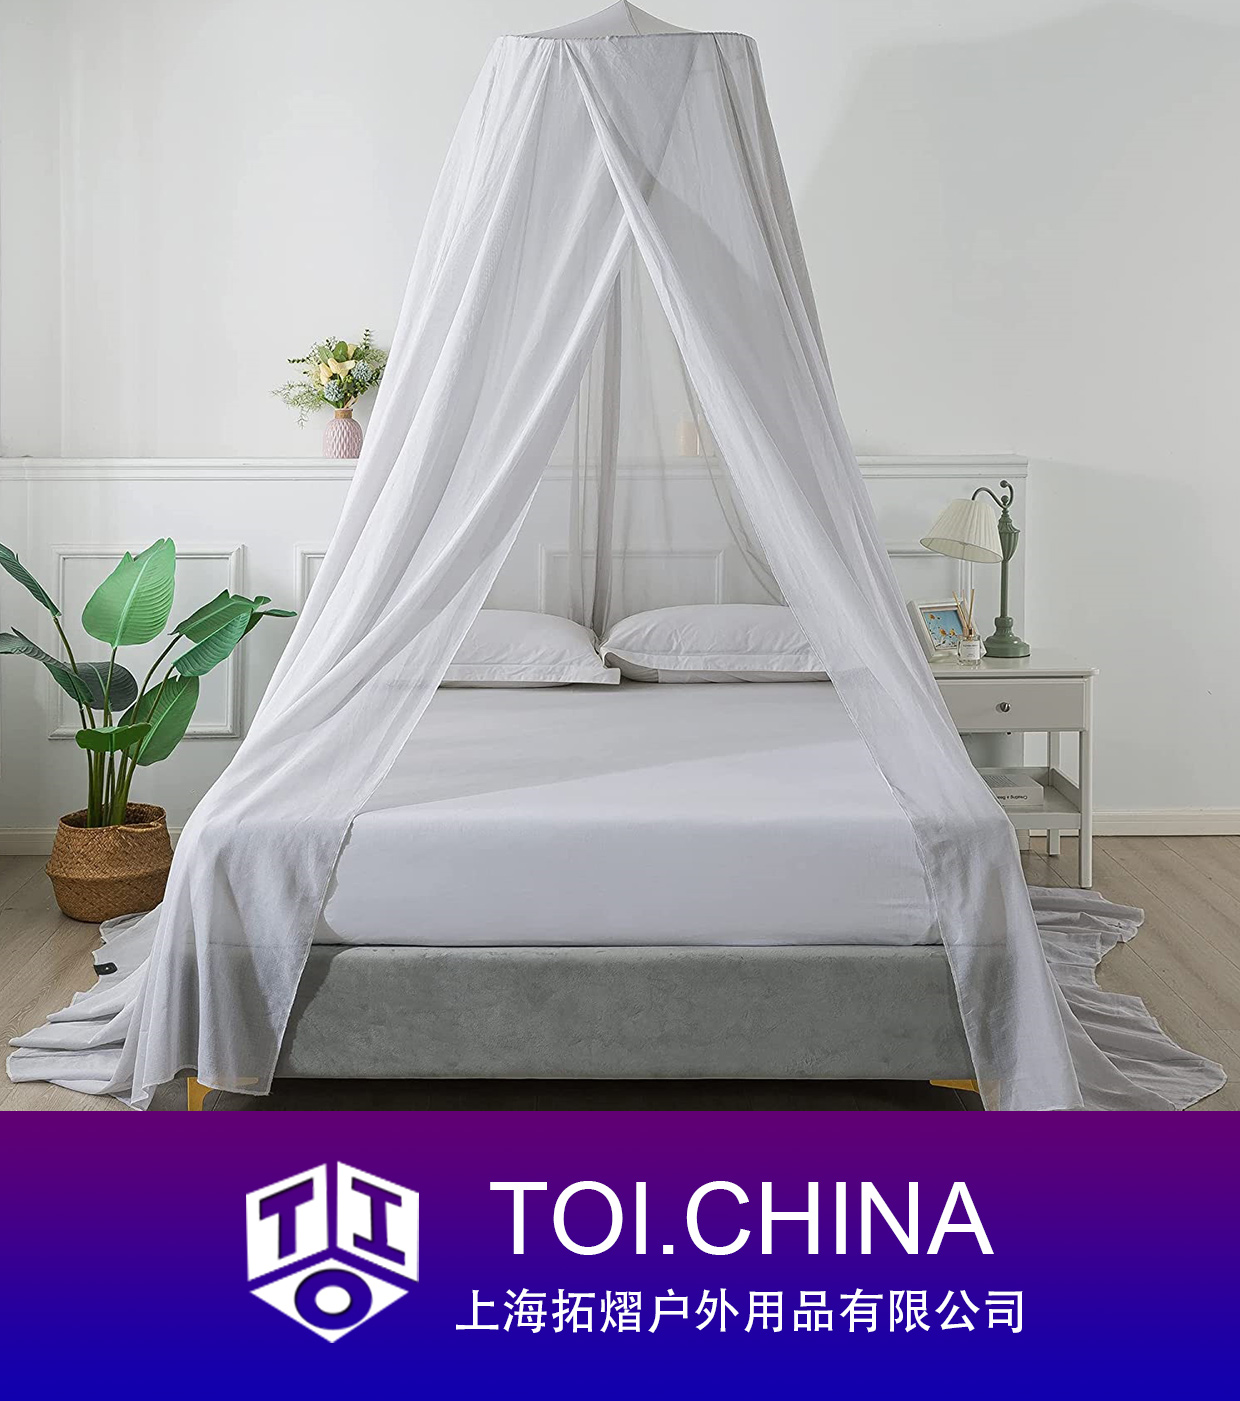 Silver Coated Mesh with Cotton Radiation Protection Canopy,EMF Shielding Bed Net